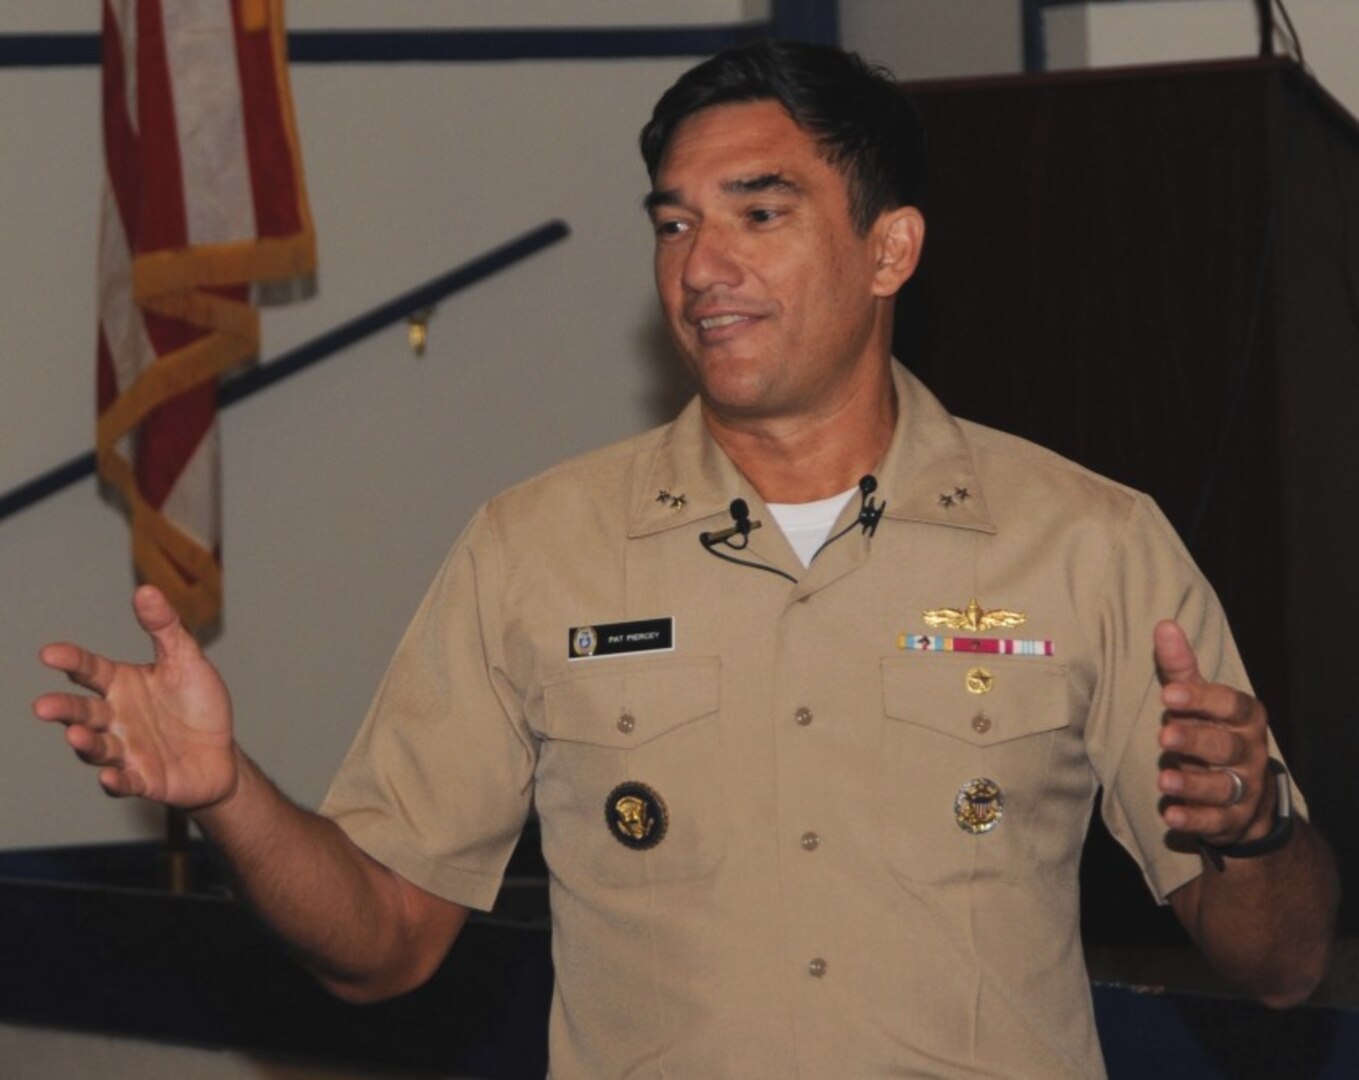 DAHLGREN, Va. - Rear Adm. Patrick Piercey, Naval Surface Force Atlantic commander, tells the audience why he is passionate about diversity during his keynote speech at the Asian American and Pacific Islander Heritage Month Observance, May 23. "This is about our children, it's about our future," he said. "I think this is the challenge we have today in our nation. Everyone has dreams and what we need to do is to help enable everyone to have a chance to get to their dreams." 